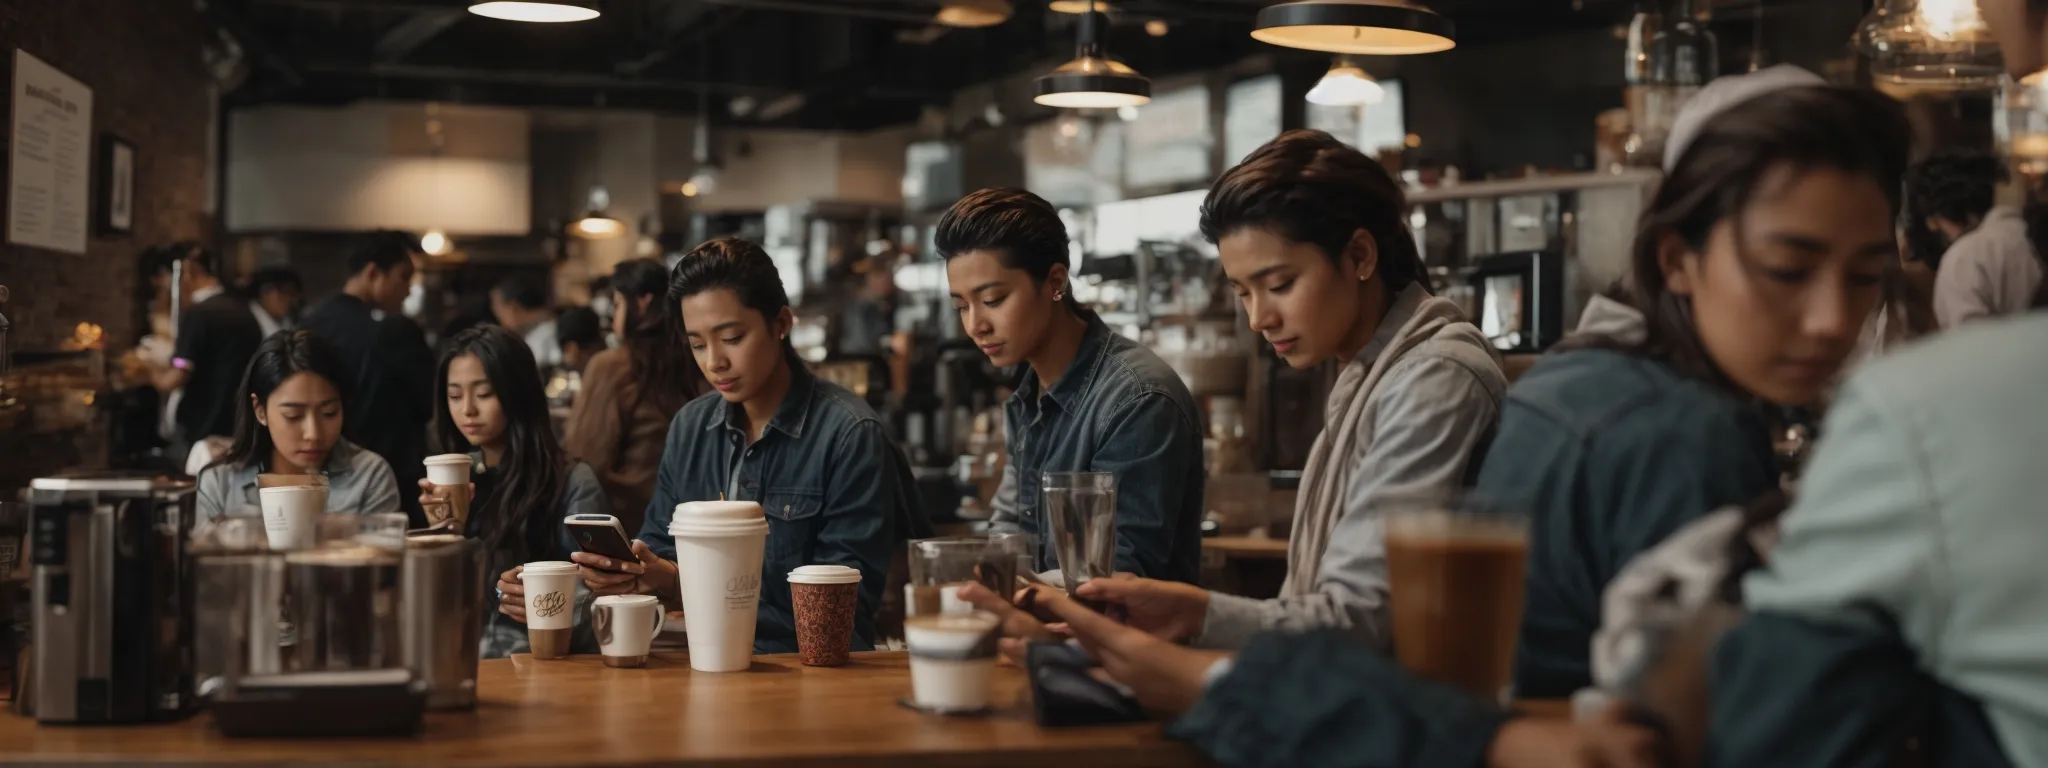 a bustling local coffee shop with people focused on their smartphones and tablets, seemingly engaging with the digital world around them.